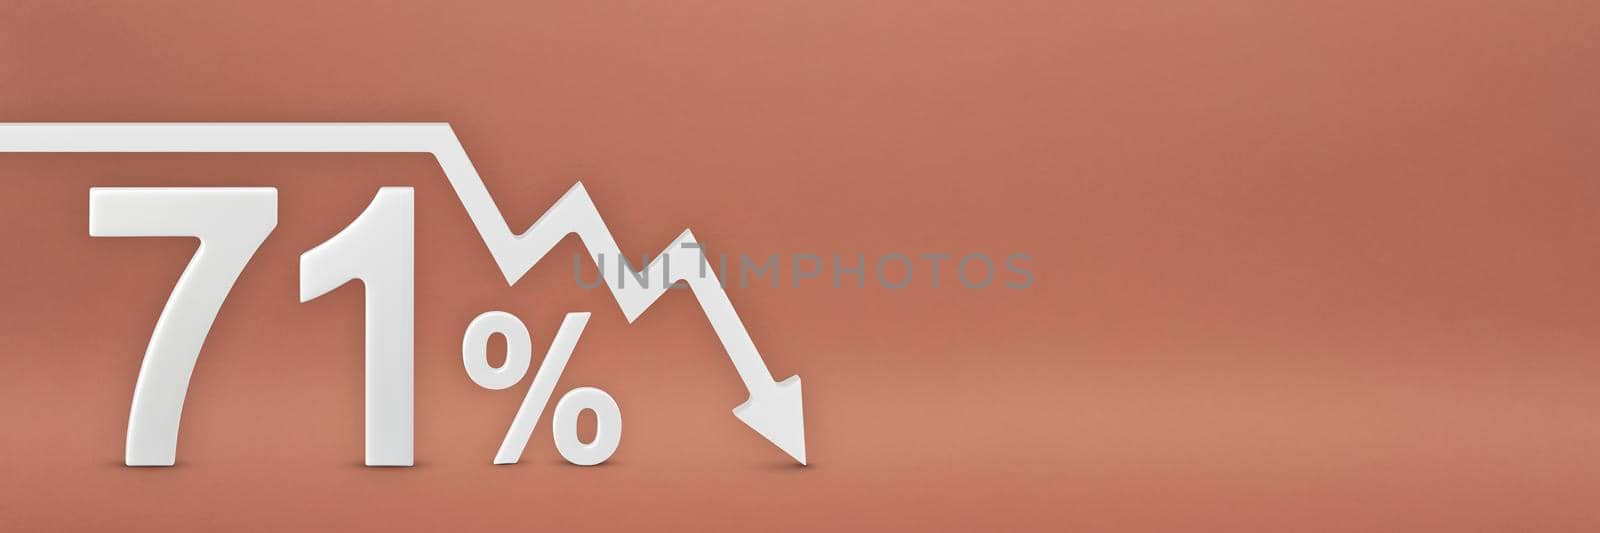 seventy-one percent, the arrow on the graph is pointing down. Stock market crash, bear market, inflation.Economic collapse, collapse of stocks.3d banner,71 percent discount sign on a red background